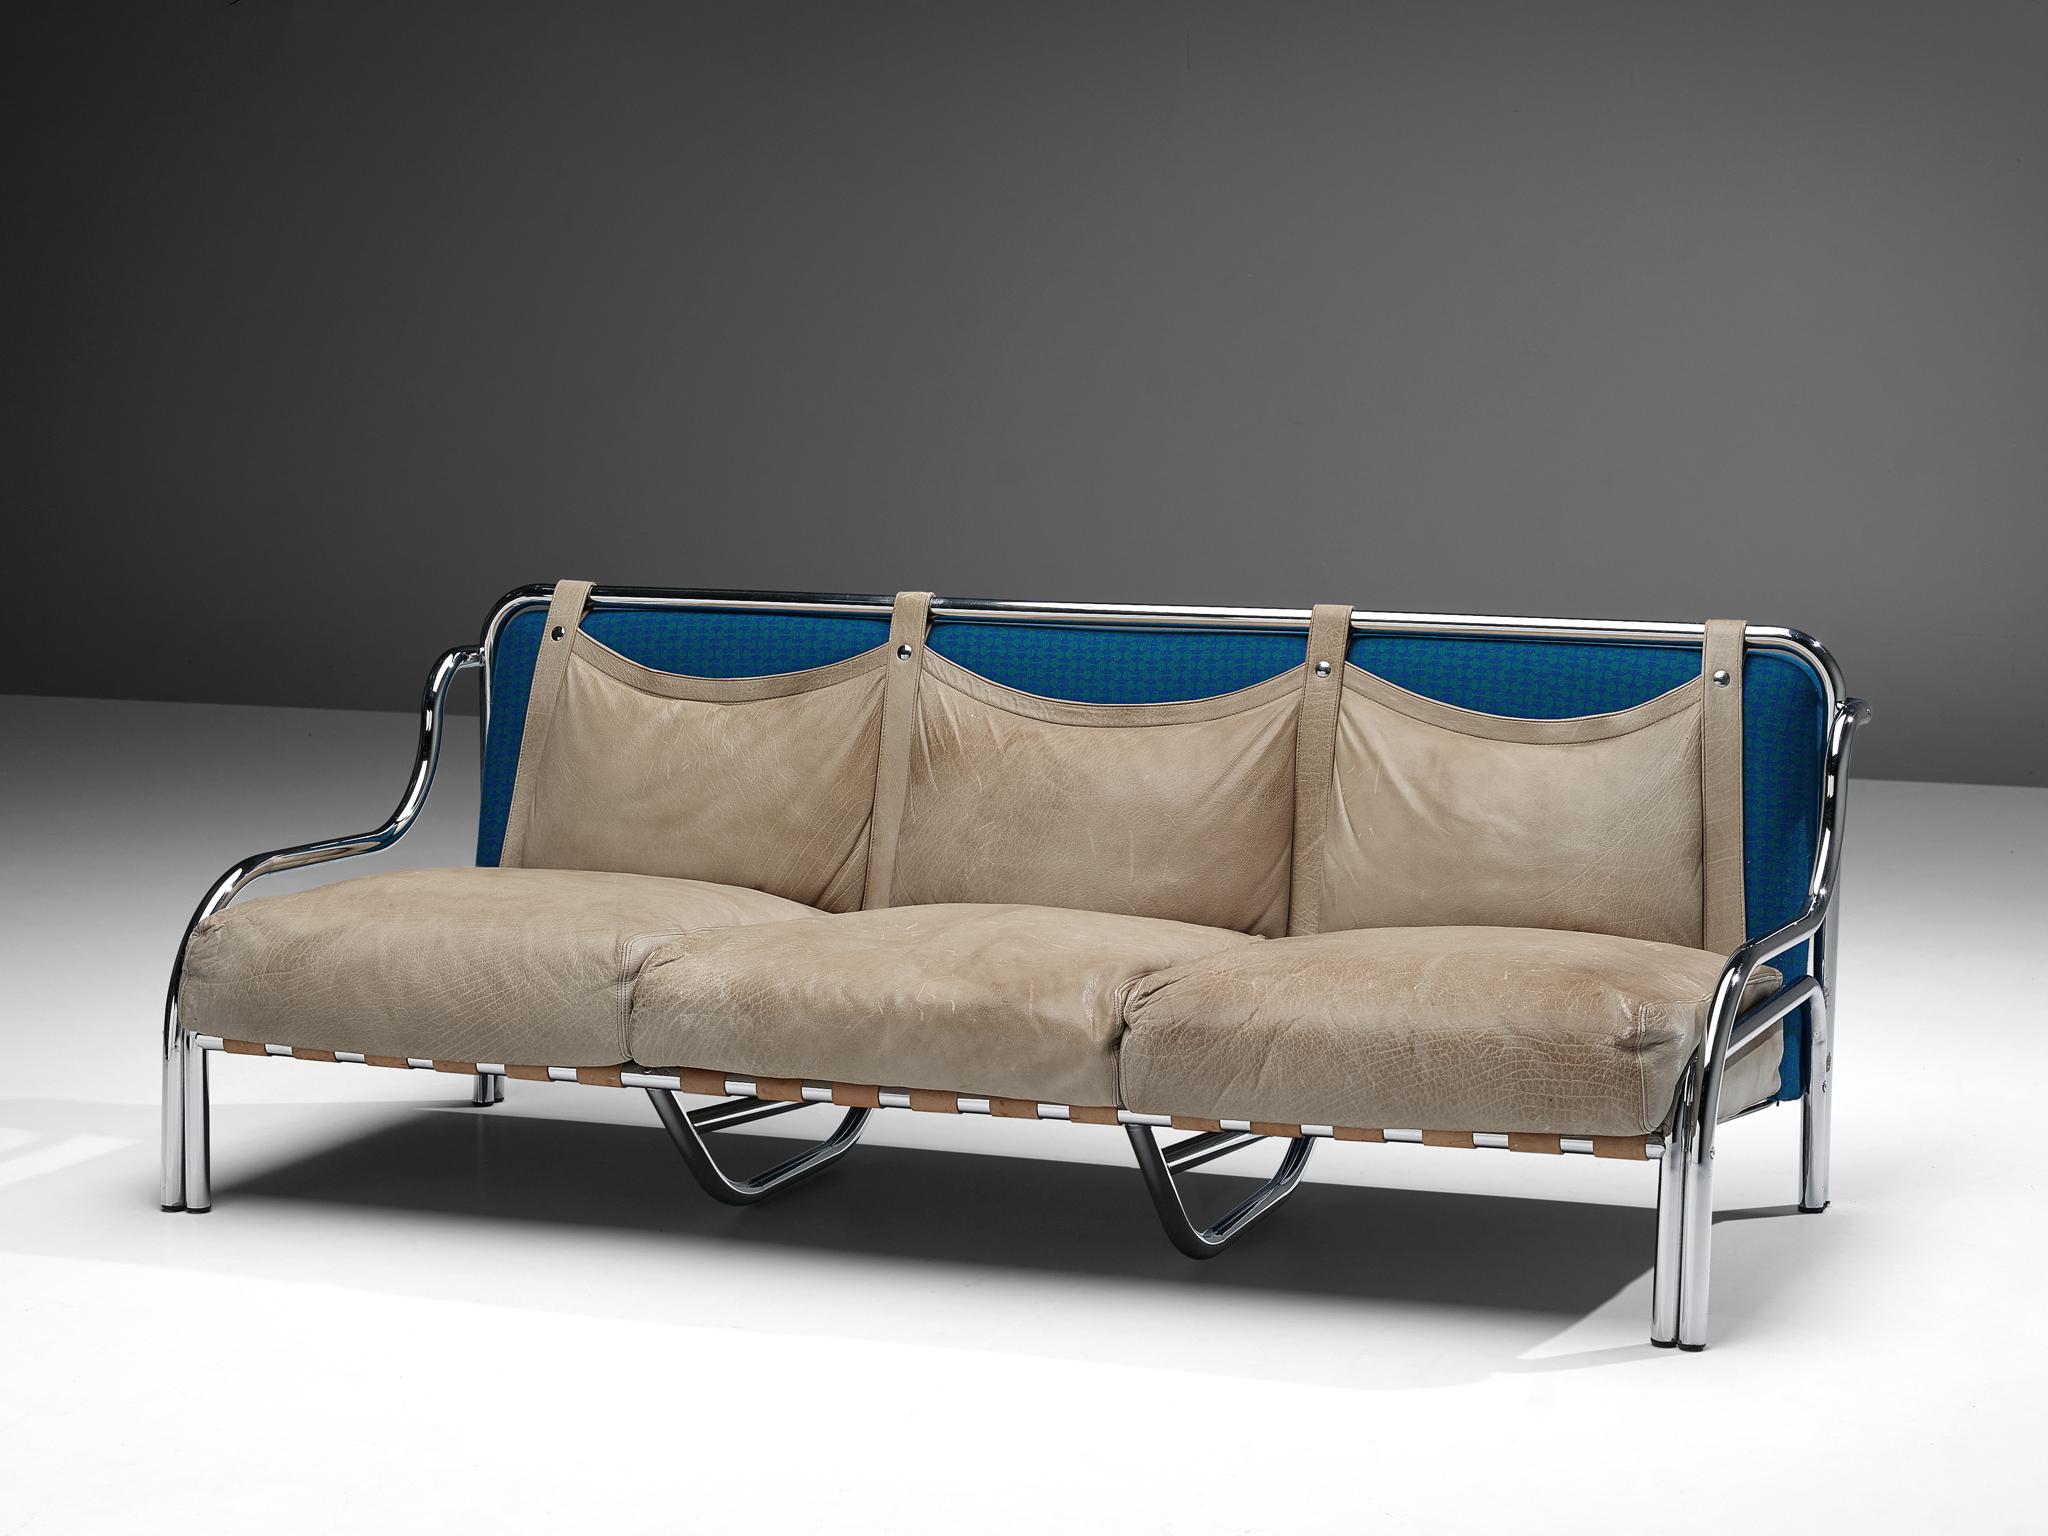 Gae Aulenti for Poltranova, sofa model 'Stringa', leather, chromed metal, blue fabric upholstery, Italy, 1962

'Stringa' sofa designed by Gae Aulenti for Poltranova in 1962. A tubular chrome frame with strong proportions and curves holds leather